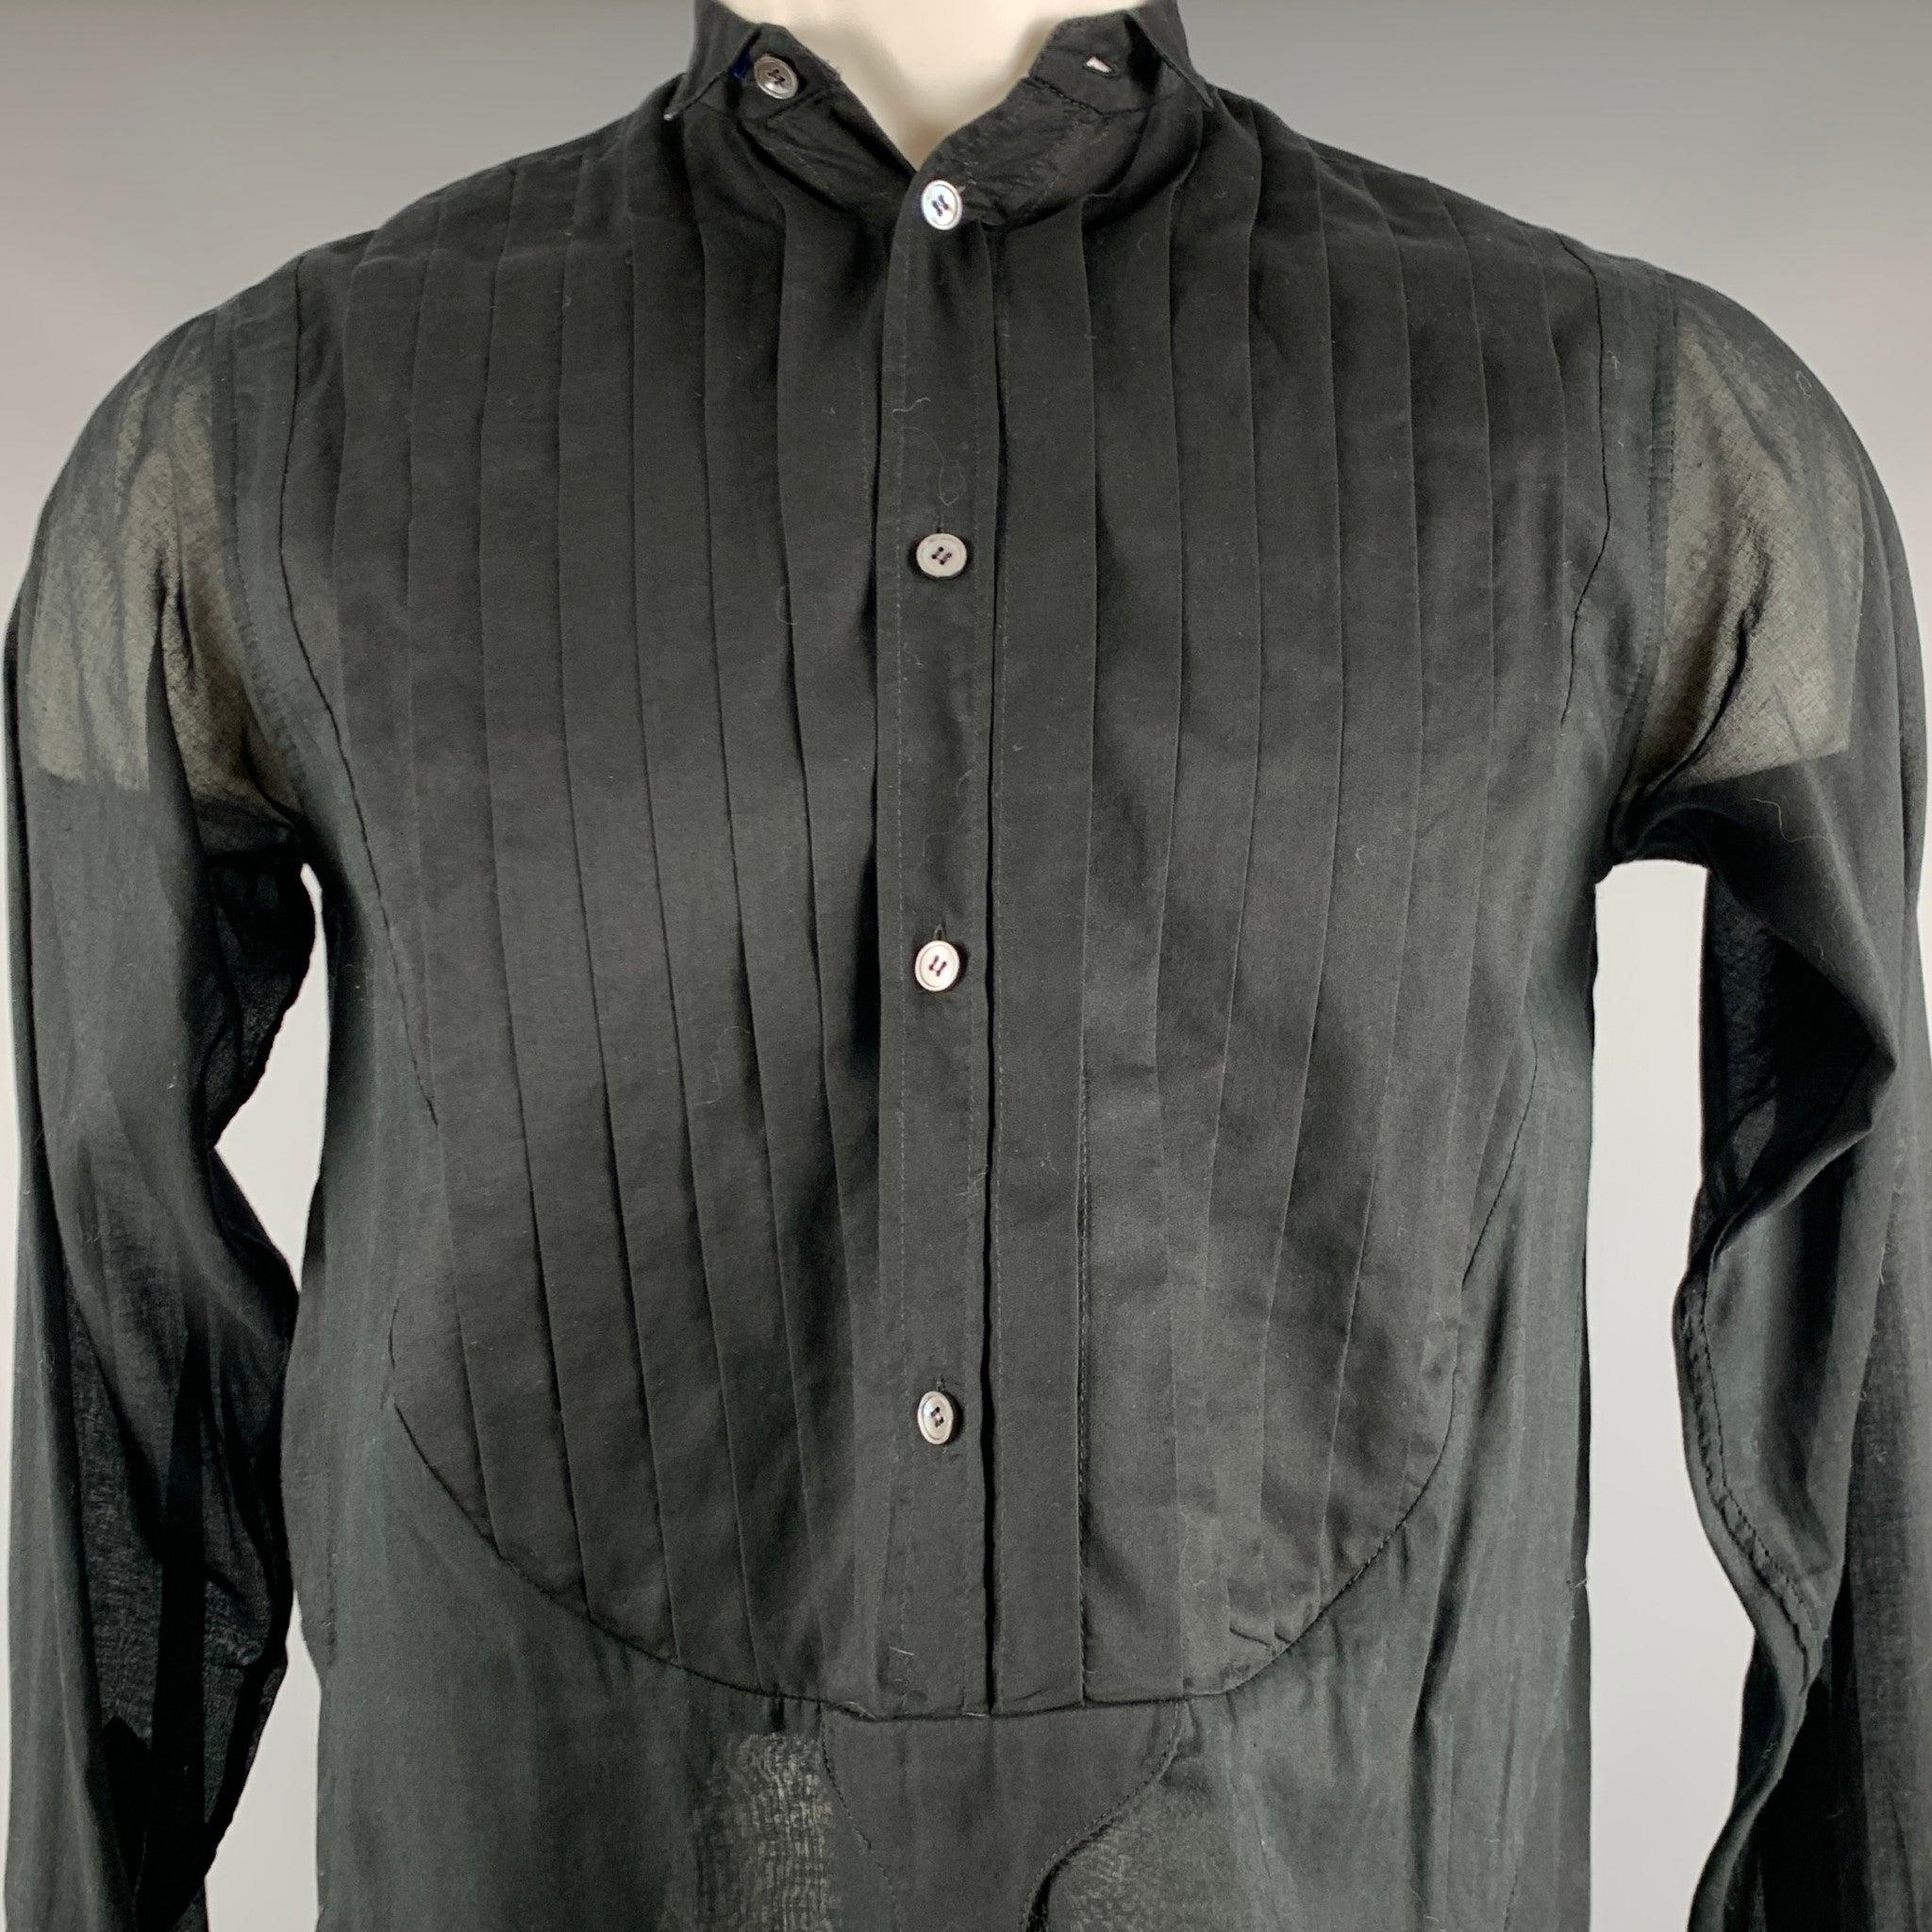 FAITH CONNEXION long sleeve shirt
in a black cotton fabric featuring long tails, pleated front, wingtip tuxedo collar, and half placket closure. Made in Romania.Excellent Pre-Owned Condition. 

Marked:   XS 

Measurements: 
 
Shoulder: 16 inches